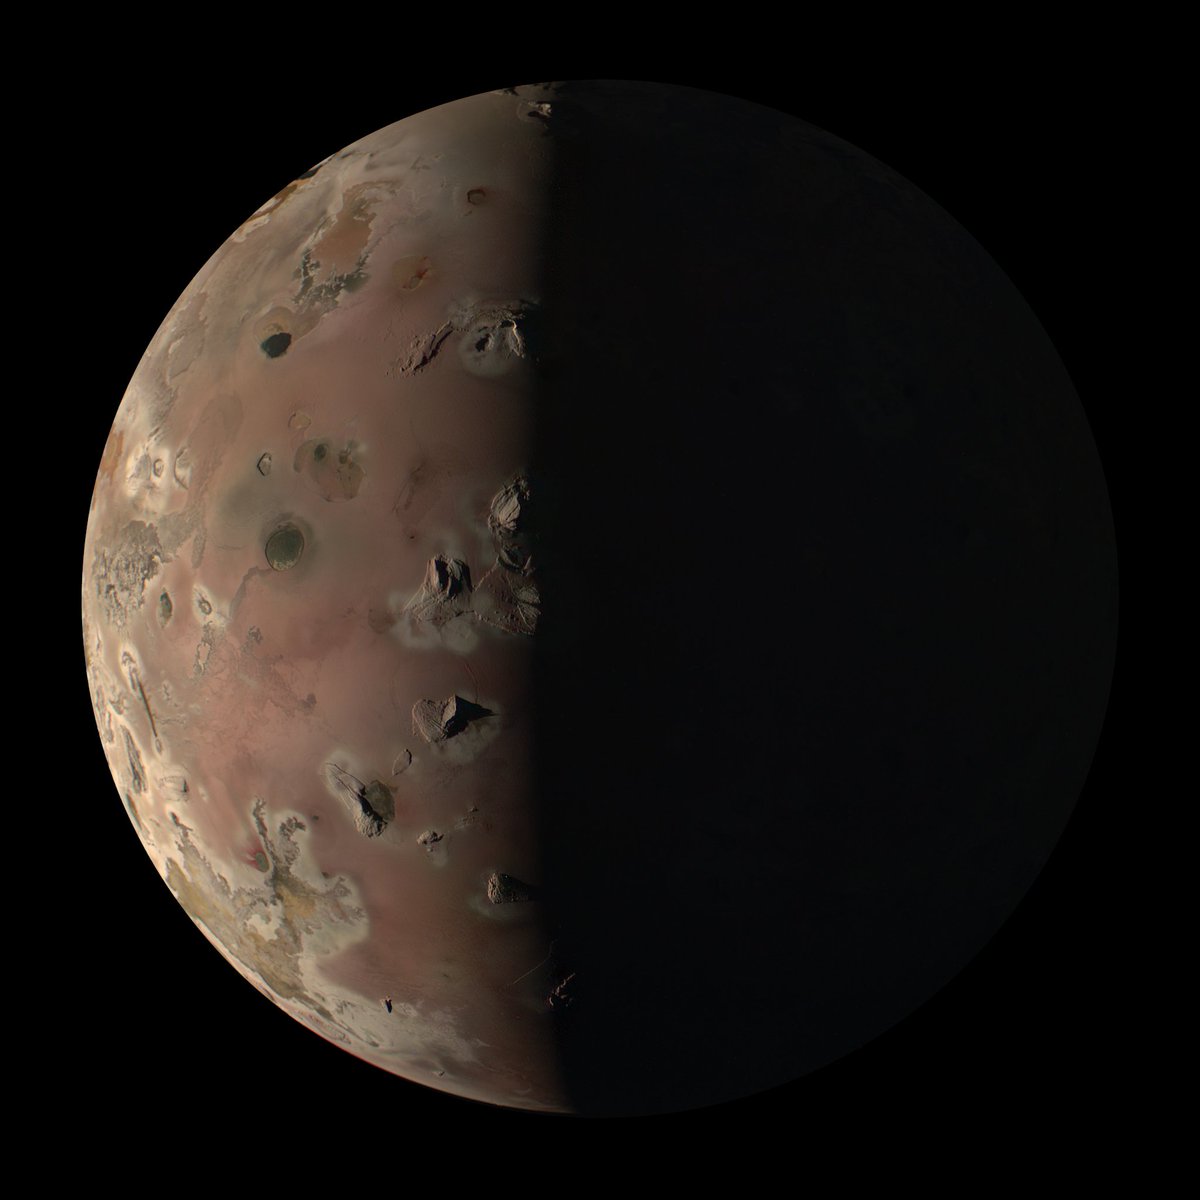 @NASAJPL @SwRI A color view of Jupiter's moon Io, the most volcanically active body in the solar system, captured by NASA's #JunoMission on Dec. 30. More images at missionjuno.swri.edu. Make your own virtual visit to Io at science.nasa.gov/jupiter/moons/… 
Image processed by Kevin M. Gill